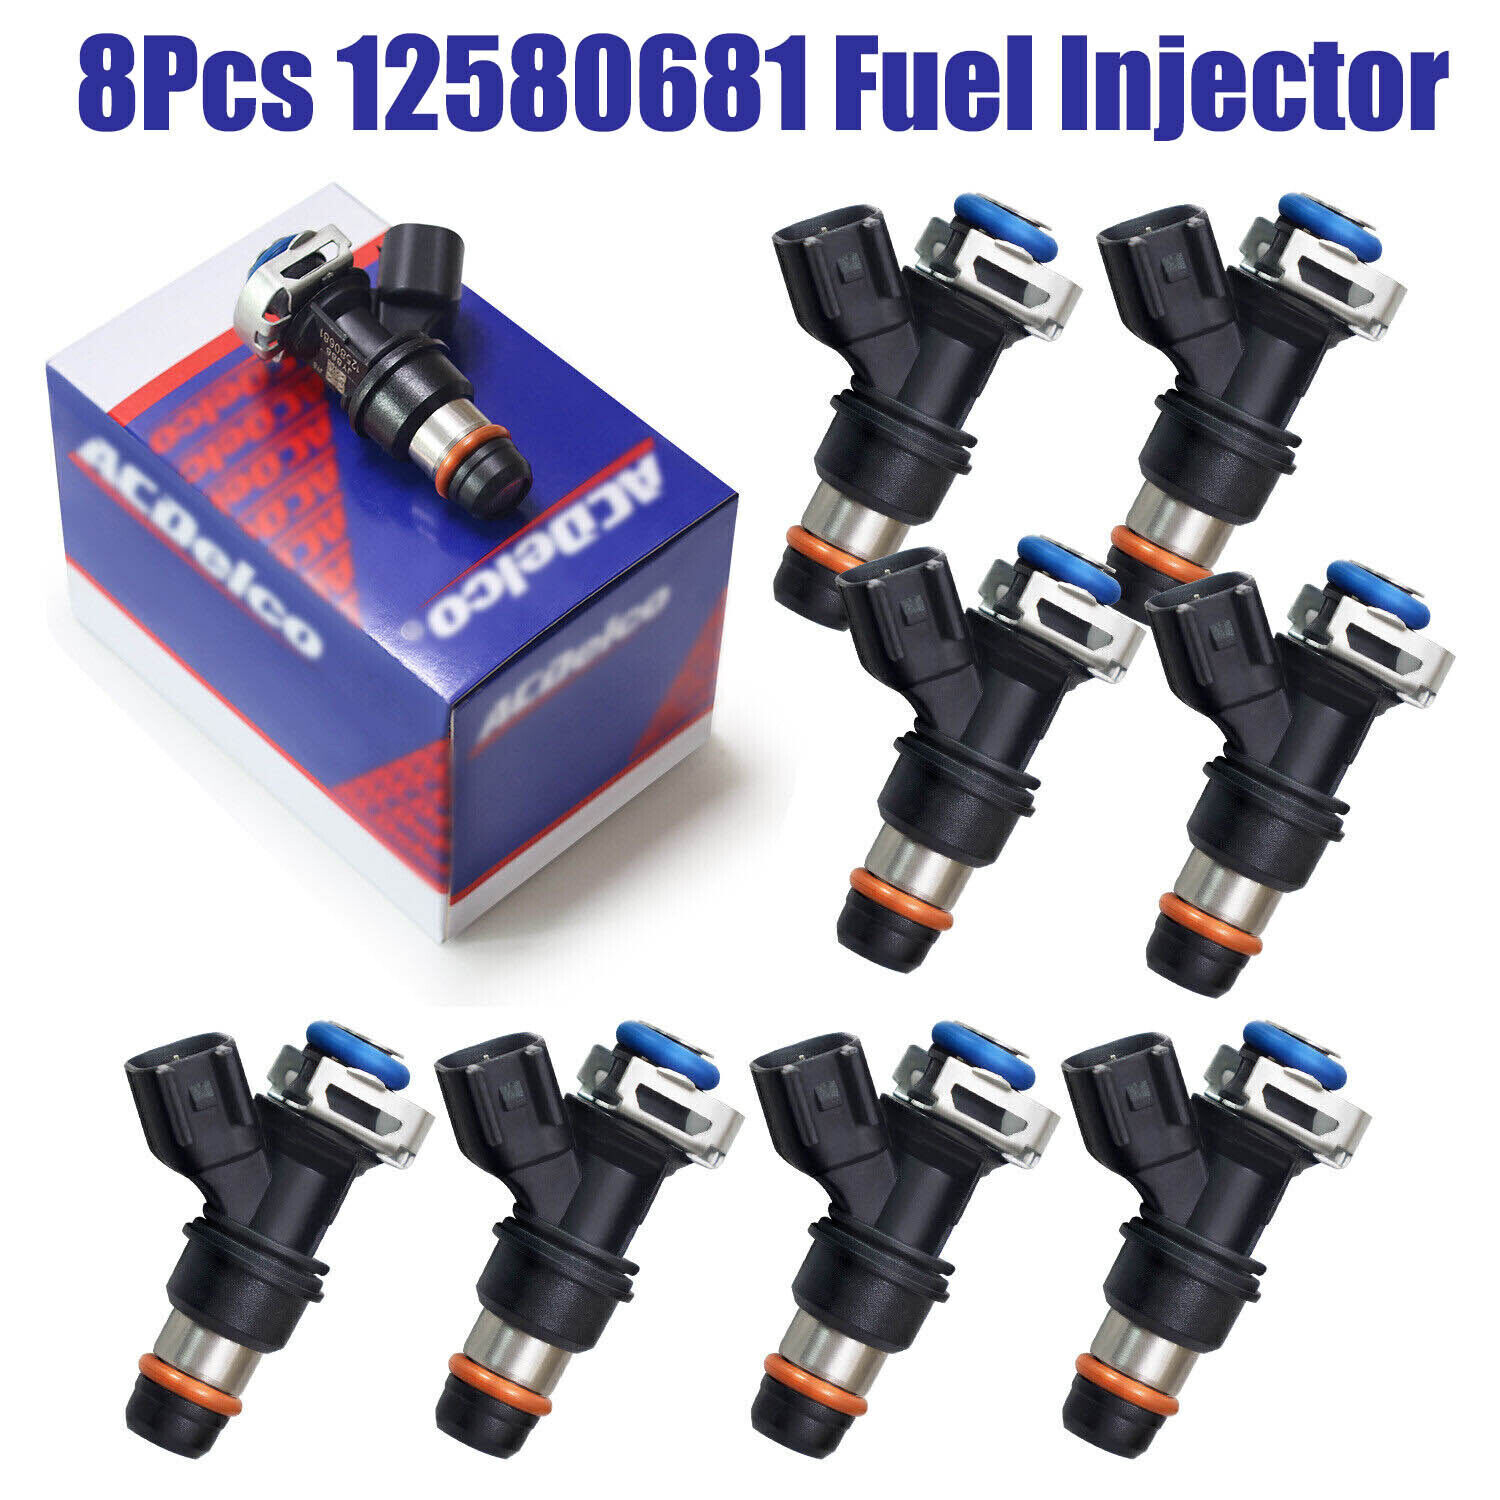 8Pcs Genuine 217-1621 Fuel Injector 12580681  For 2004-10 Chevy GMC /5.3/6.0/6.2